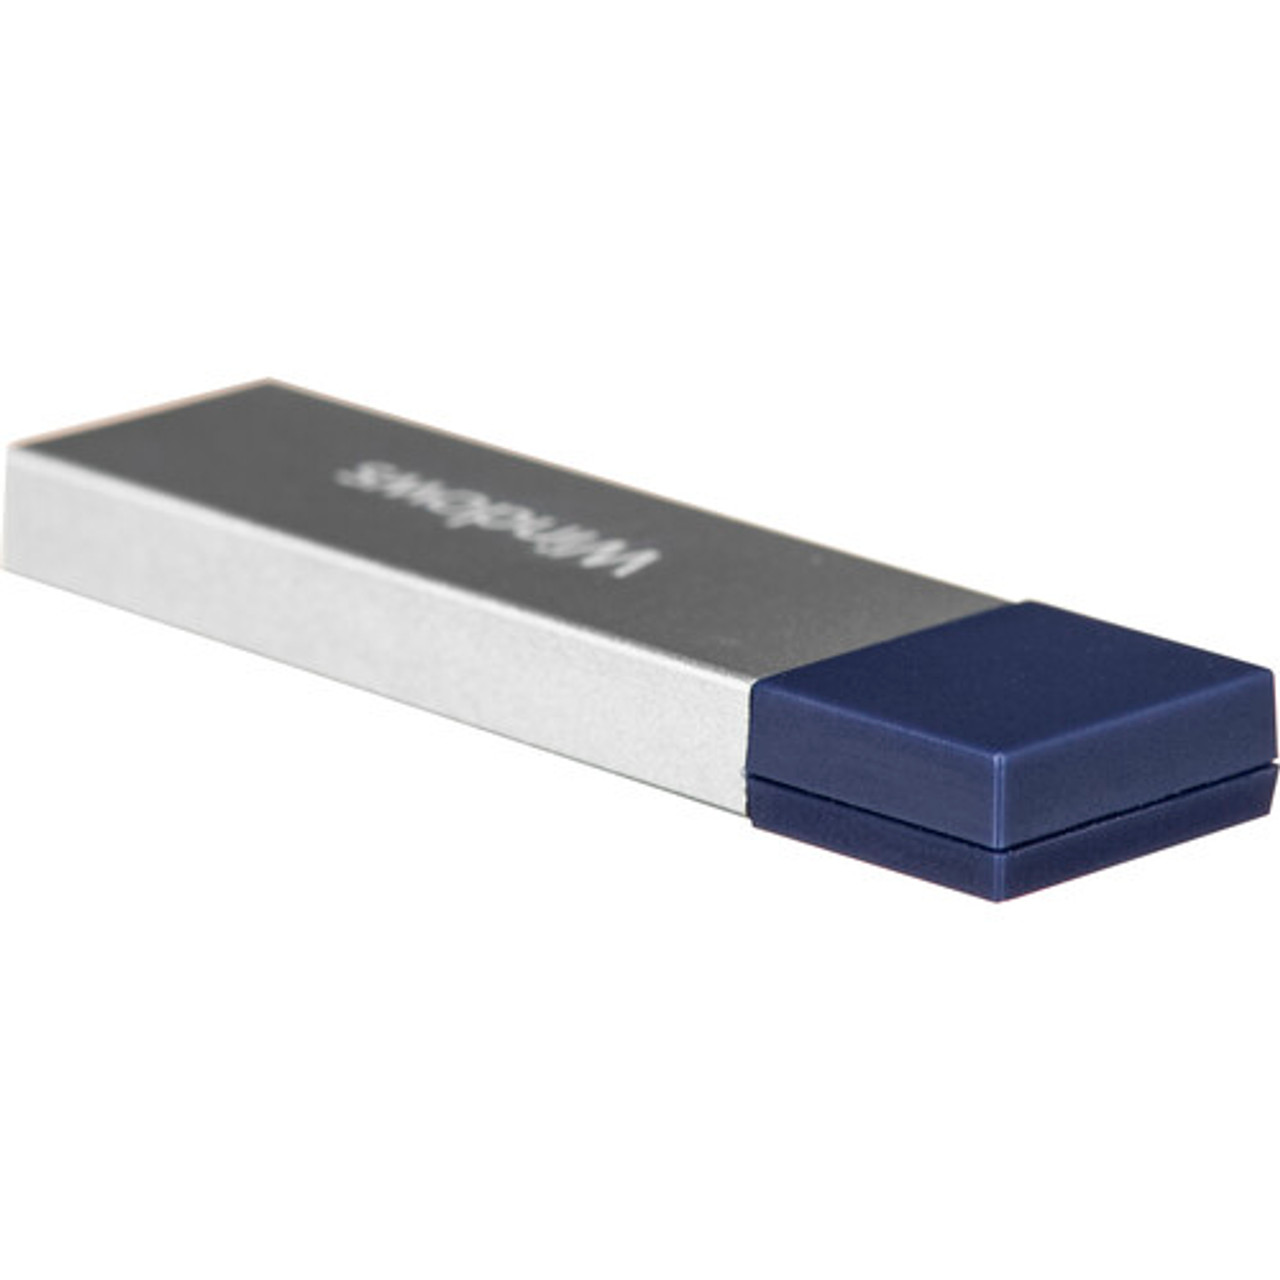 Windows 11 Pro USB Pen Drive (Physical Delivery)